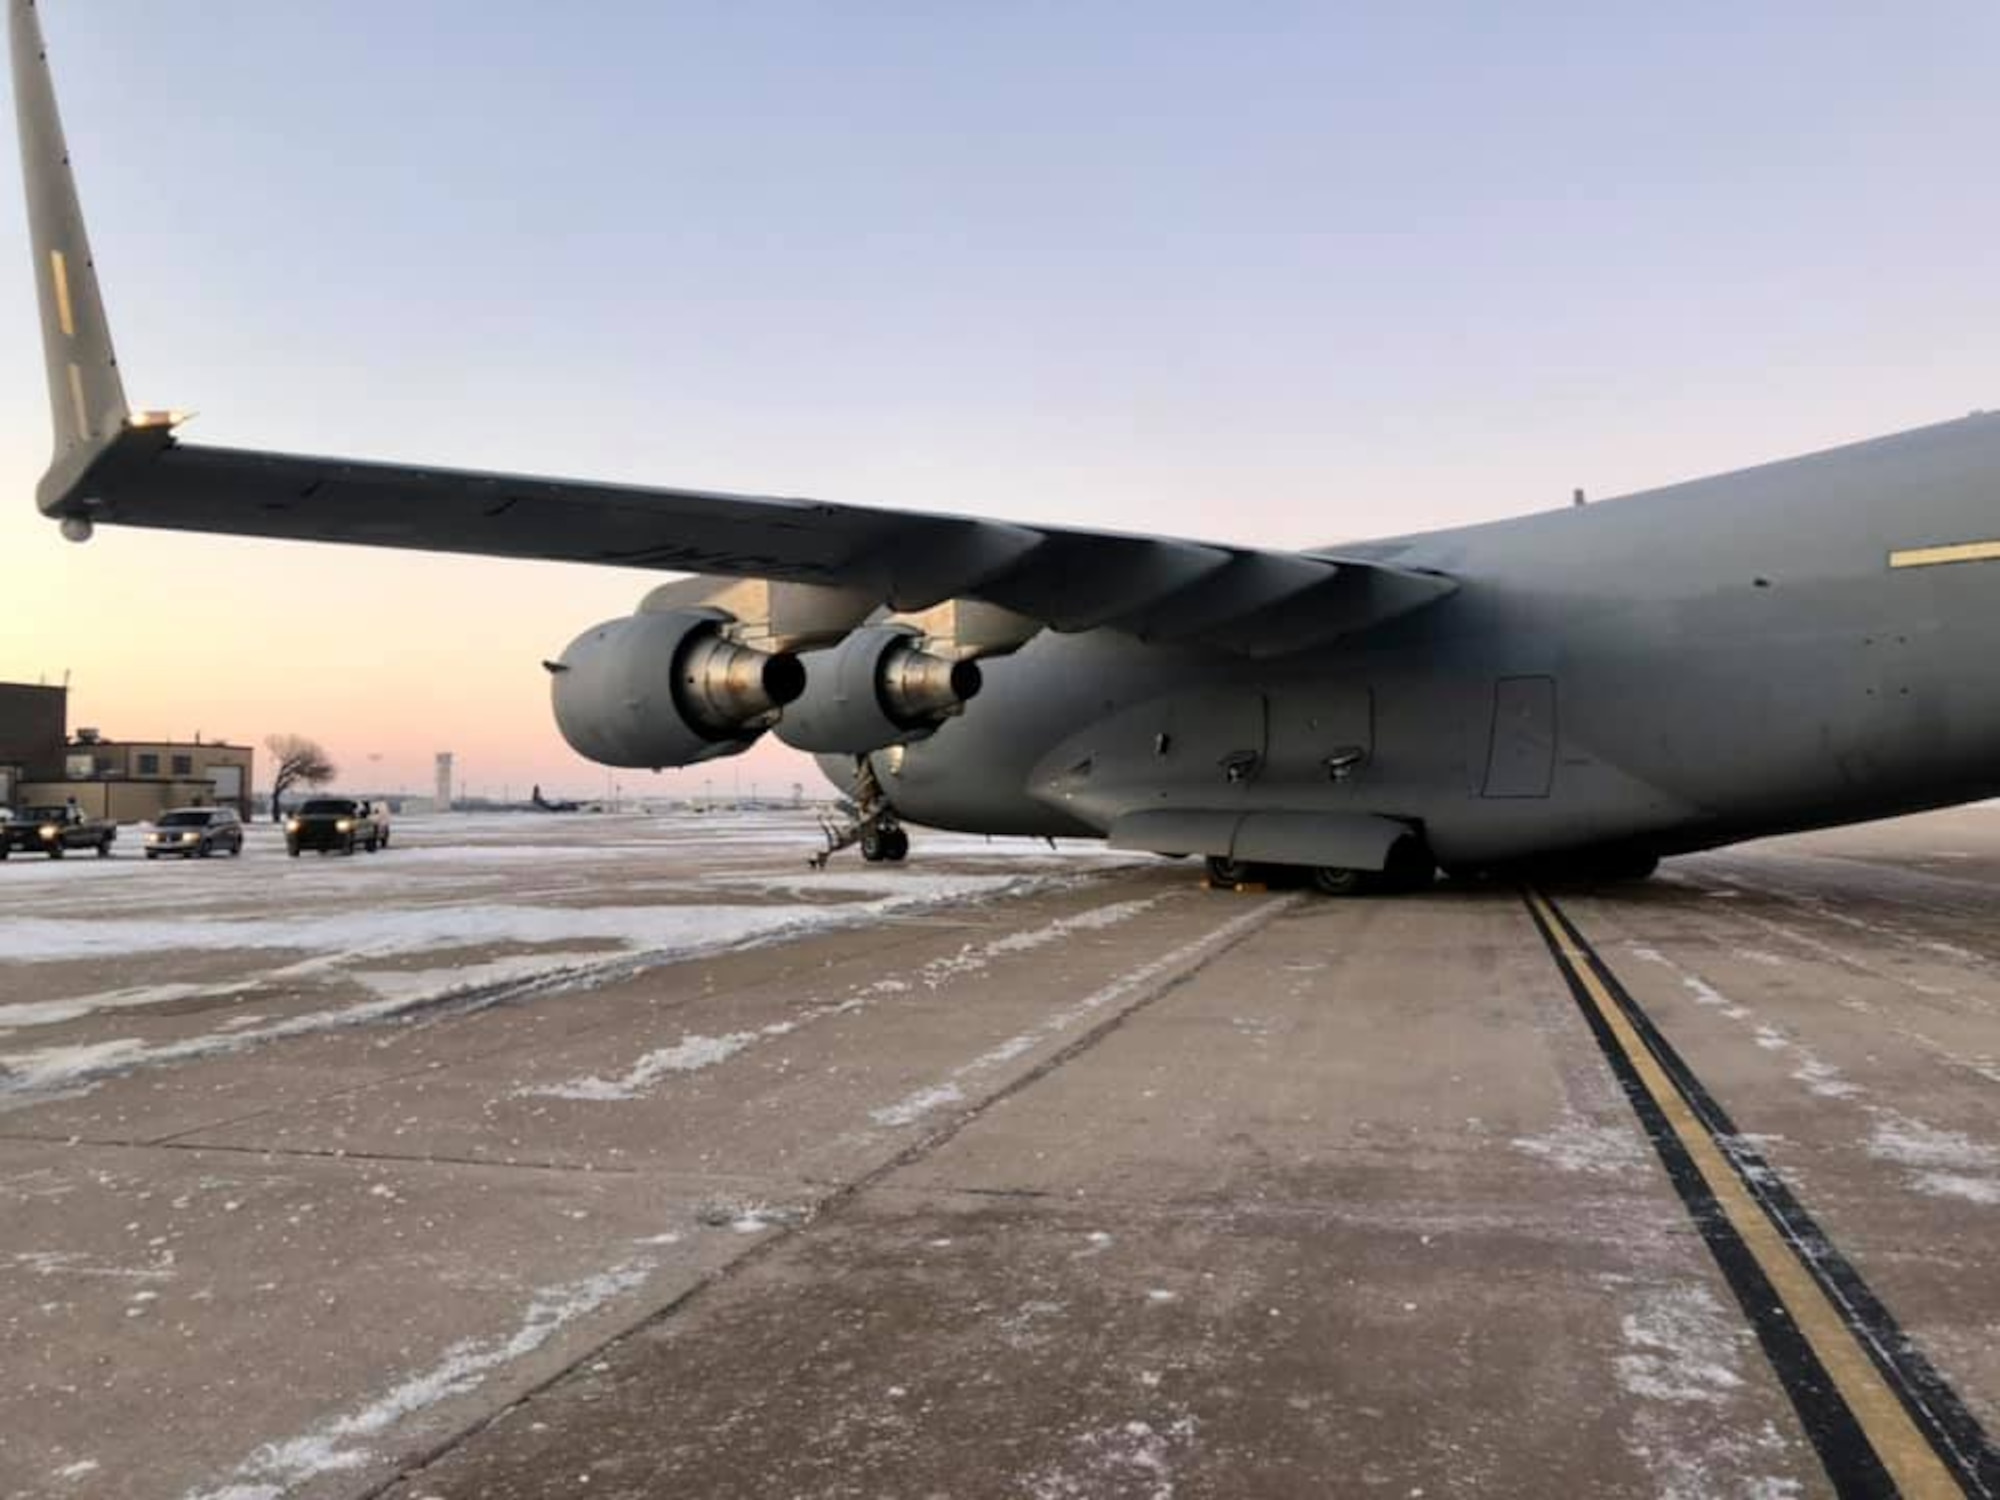 In conjunction with a Texas Task Force, our 73rd Aerial Port Squadron and 301st Fighter Wing Logistics Readiness Squadron took action to deliver aid via two C-17 Globemasters to the local/state communities that are in recovery from the recent weather storm at U.S. NAS JRB Fort Worth, Texas during the week of February 14, 2021. In less than 18 hours from inception, the three organizations organized and executed the transportation of 280k lbs. of excess water (90k bottles) from the Federal Emergency Management Agency (FEMA) branch in Dallas/Fort Worth area. (courtesy photo)